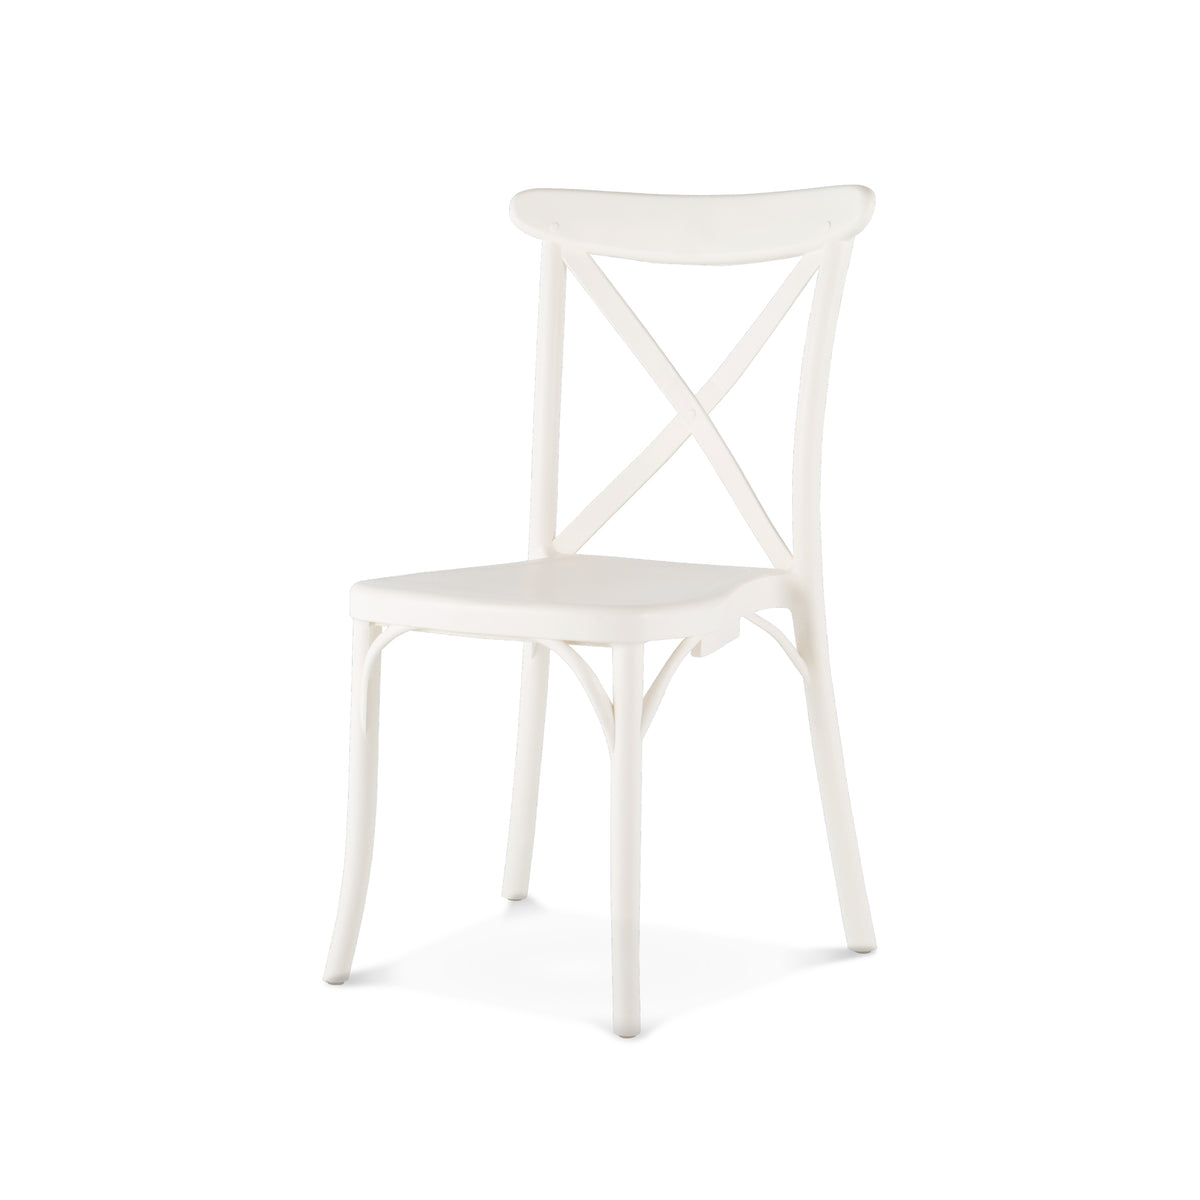 Toppy Stackable X DINNING CHAIR , 2 pcs / set.